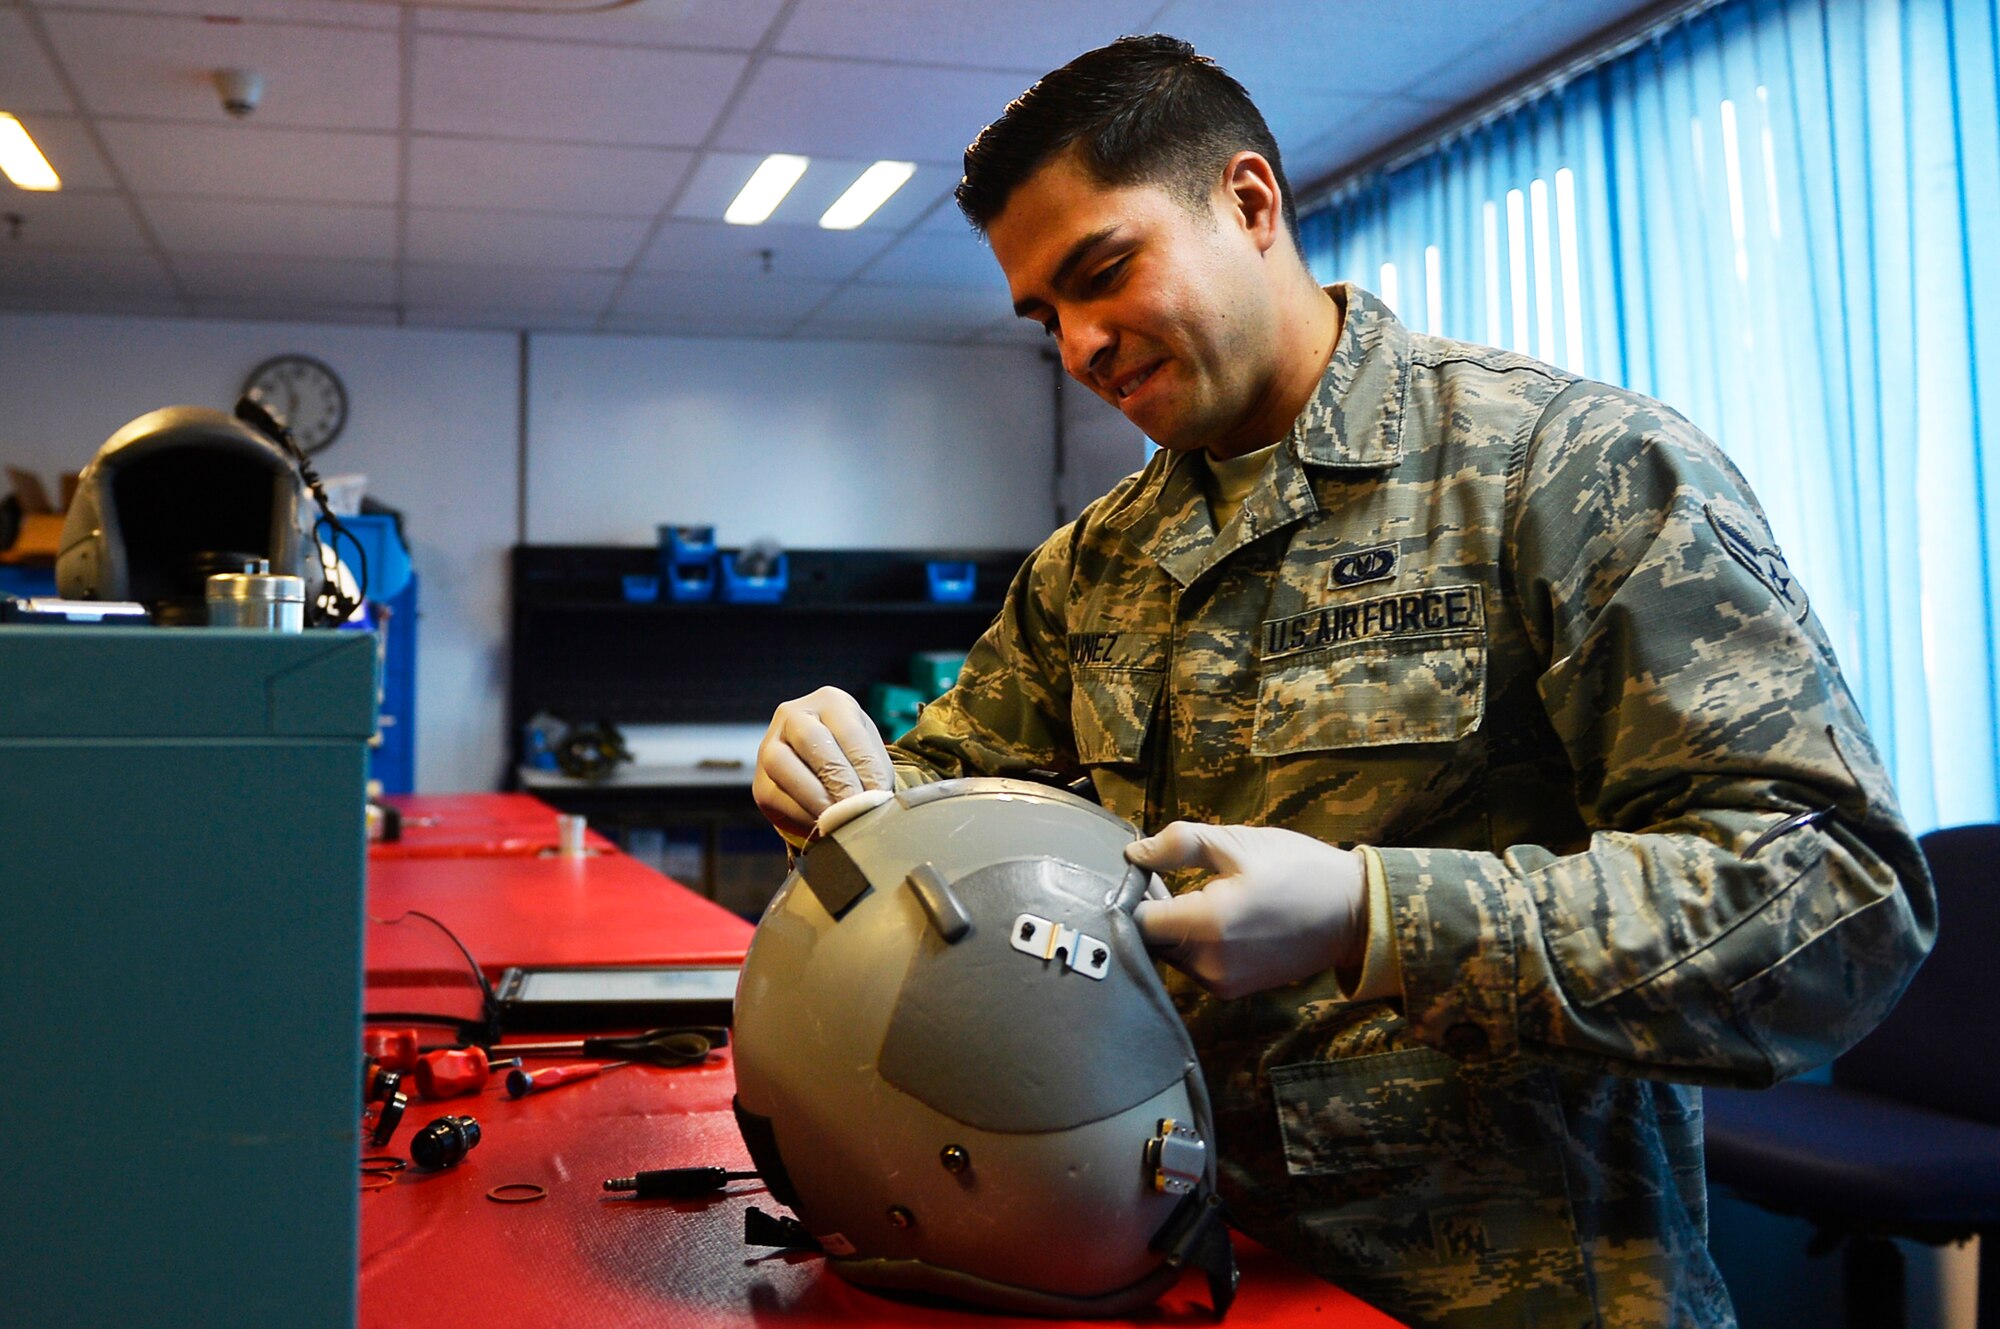 U.S. Air Force Airman 1st Class Manuel Nunez, 86th Operations Support Squadron aircrew flight equipment technician, cleans a helmet on Ramstein Air Base, Germany, Oct. 17, 2017.  Airmen in AFE are responsible for inspecting, maintaining, and keeping accountability of various kinds of equipment used by aircrew. (U.S. Air Force photo by Airman 1st Class Joshua Magbanua)